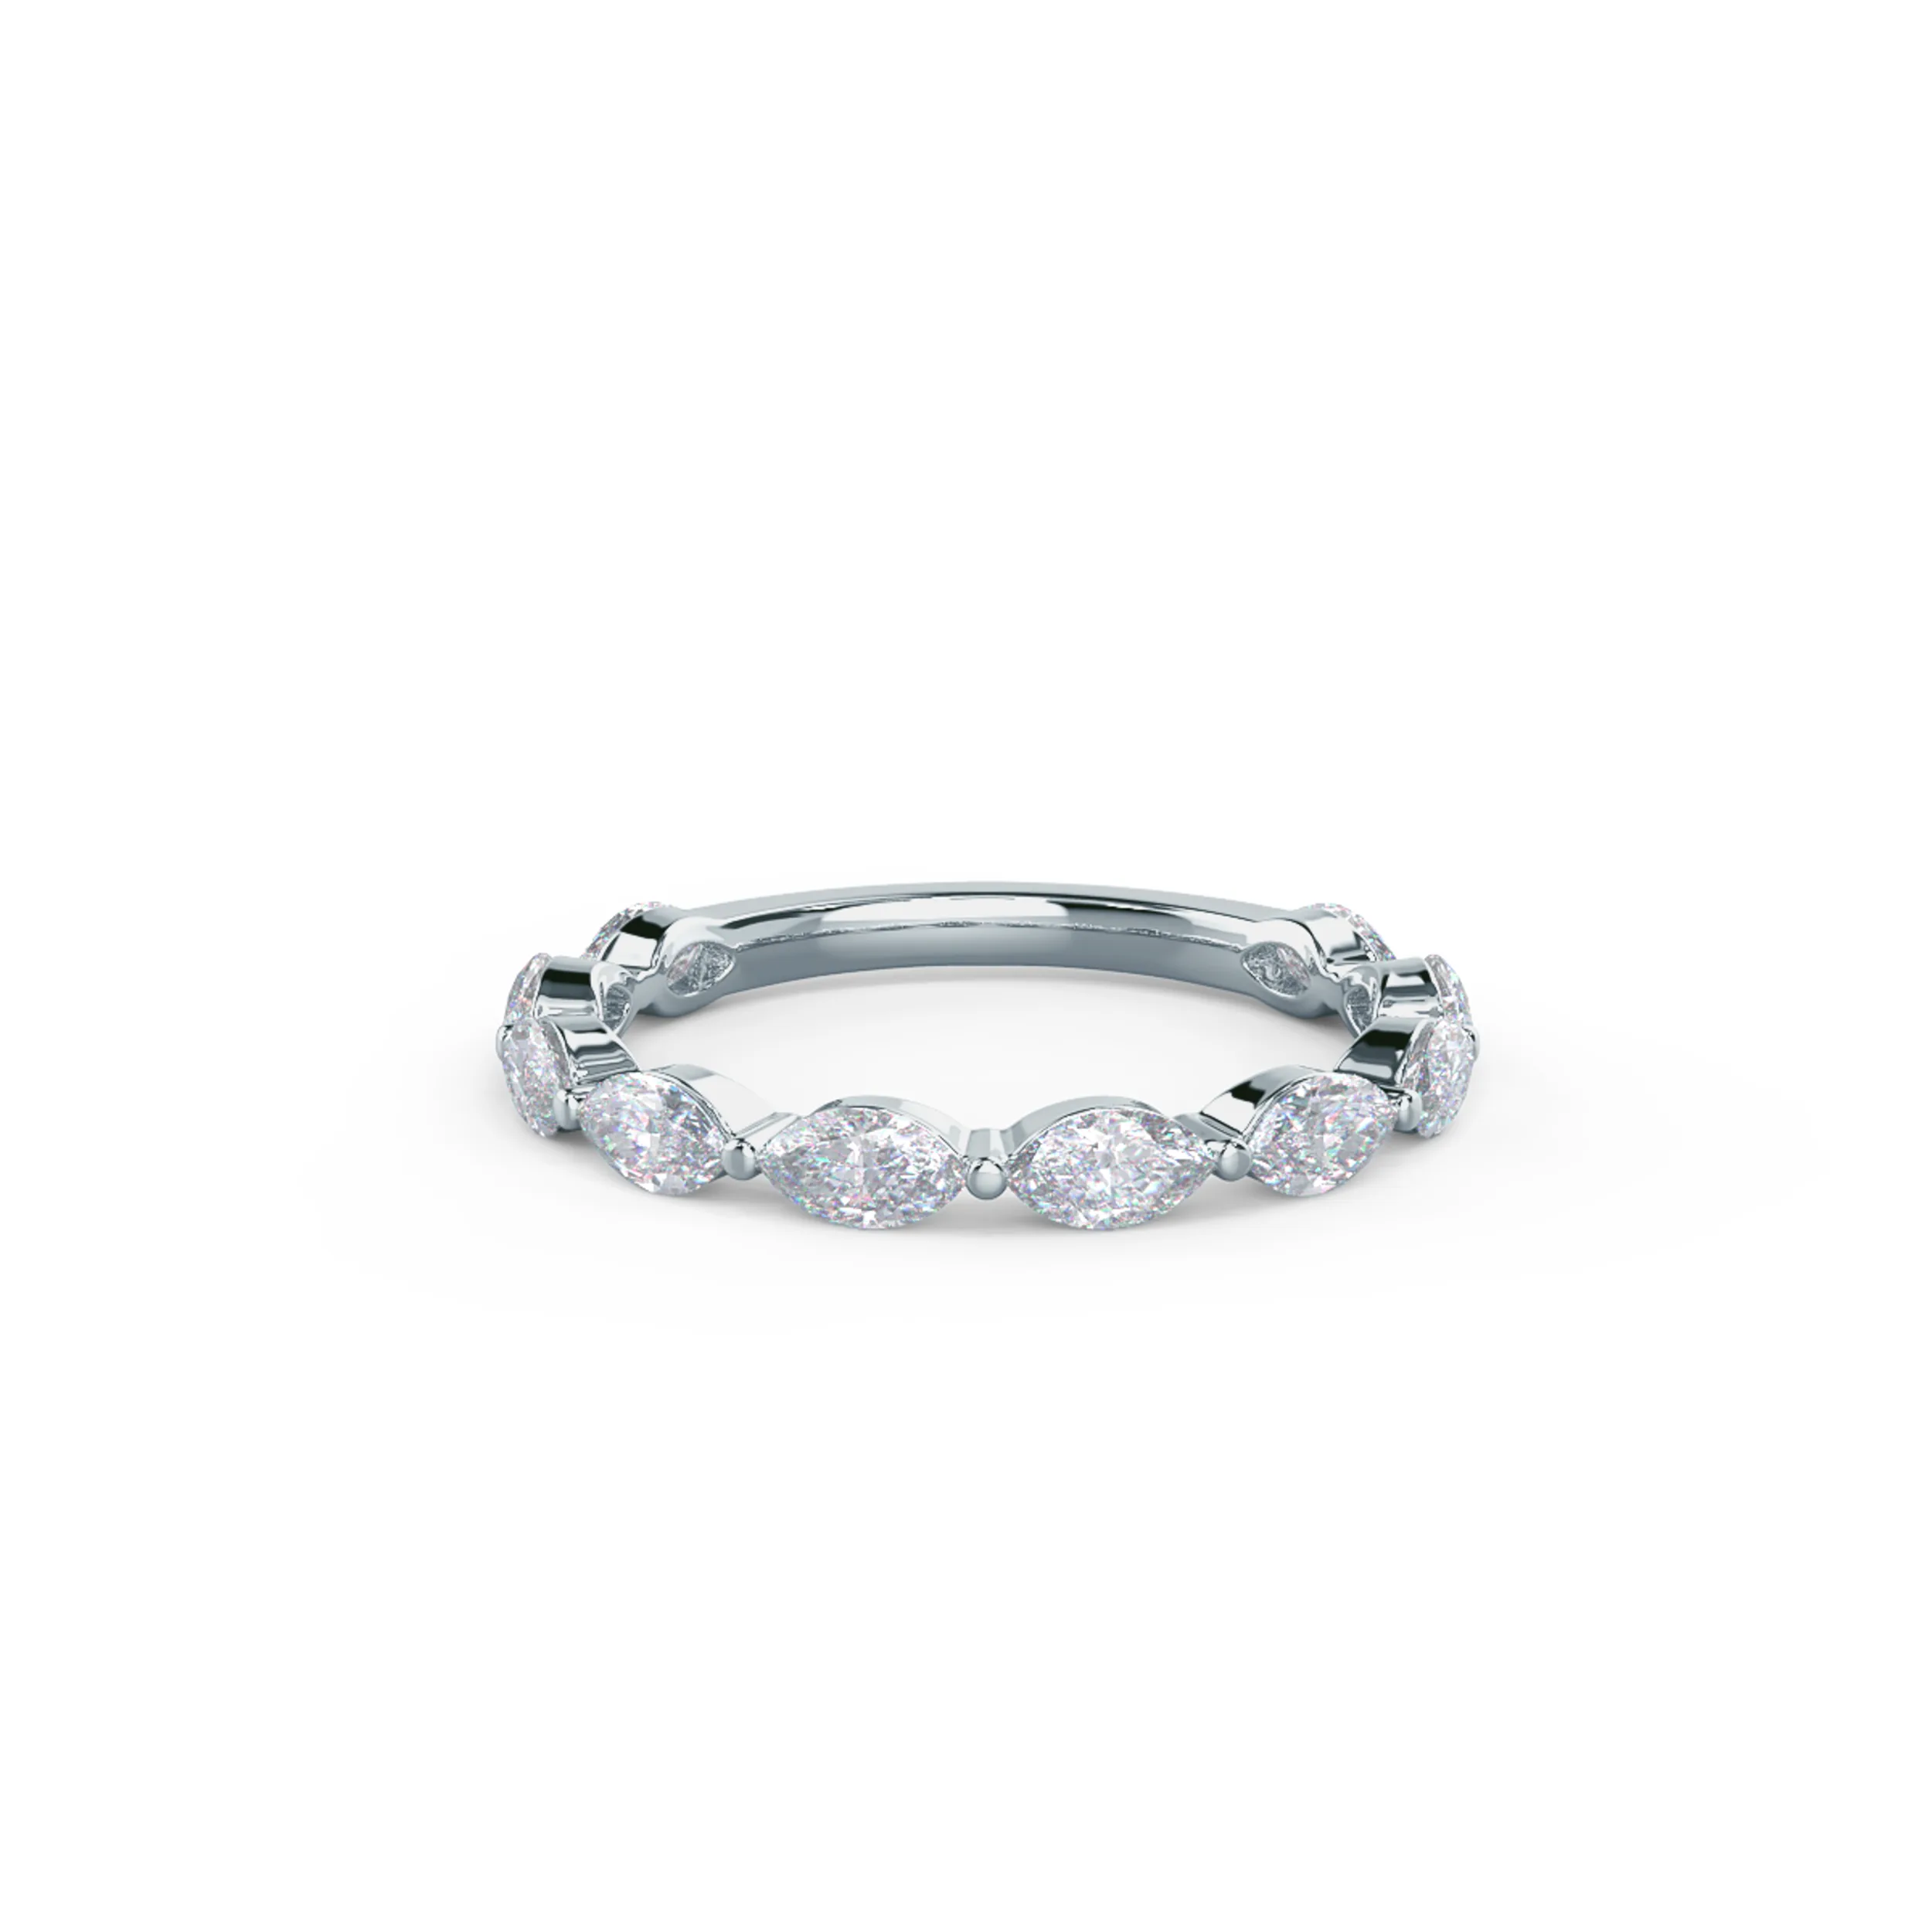 1.0 ct Synthetic Diamonds Marquise East-West Three Quarter Band in 18k White Gold (Main View)